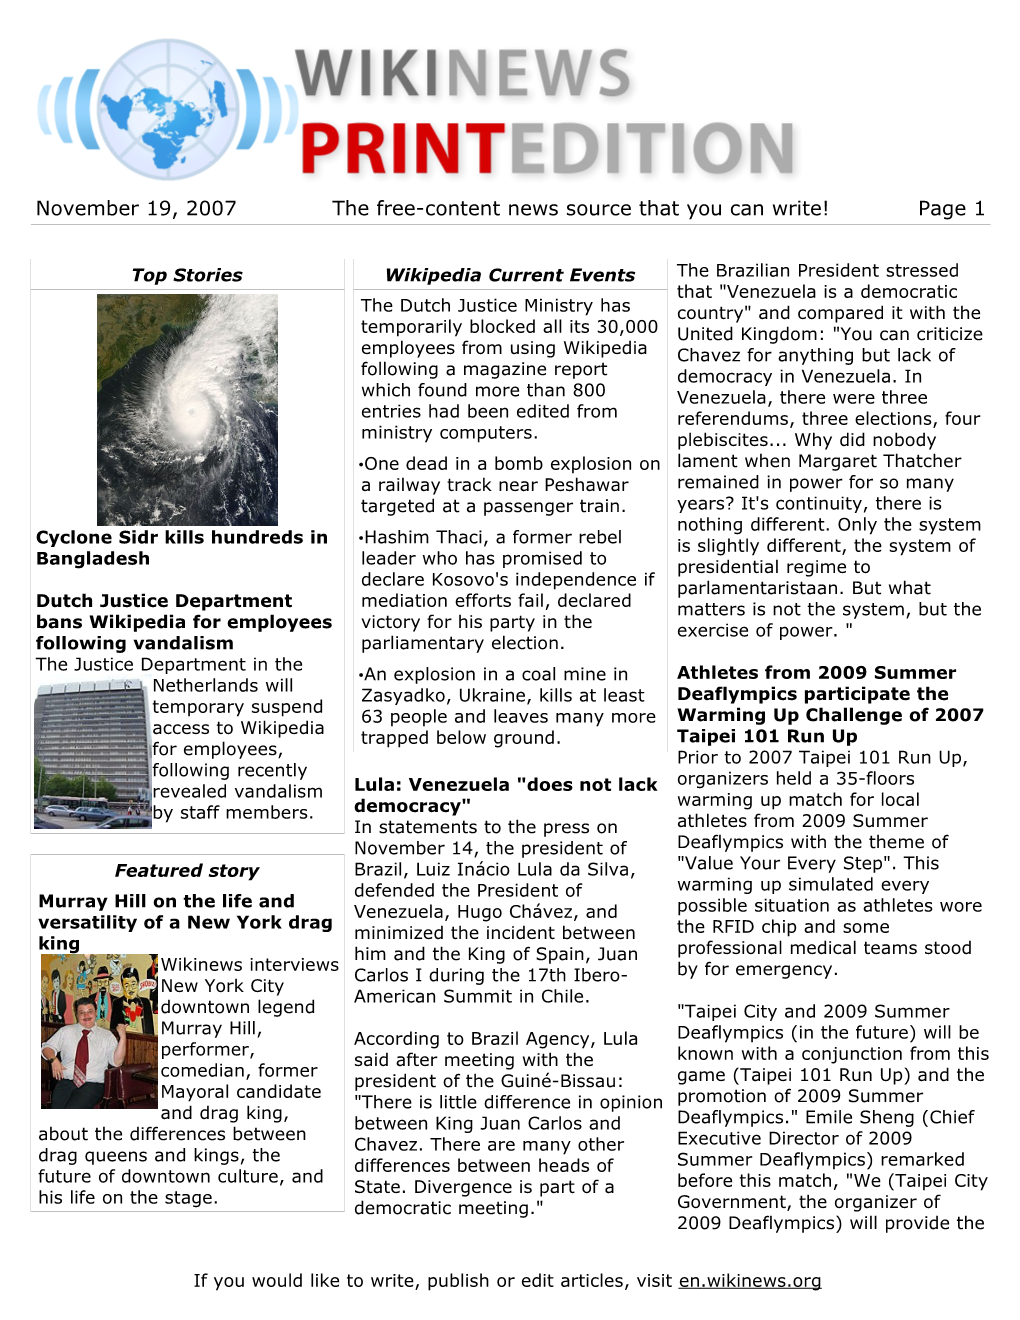 November 19, 2007 the Free-Content News Source That You Can Write! Page 1